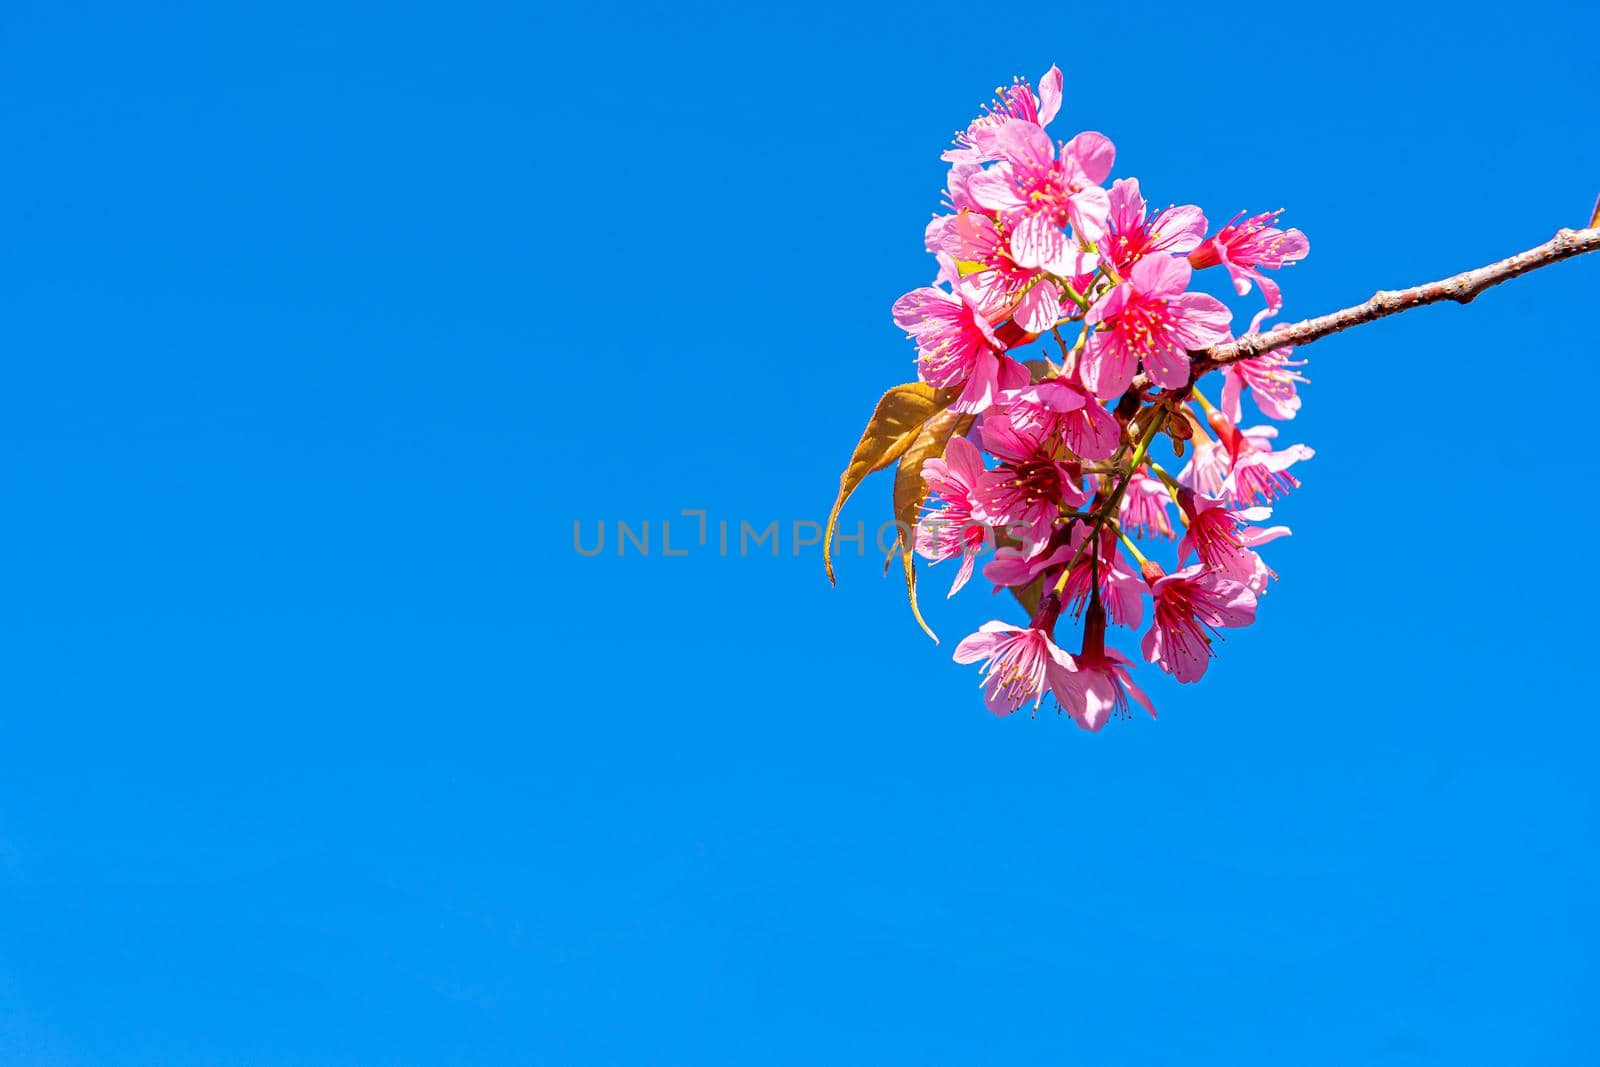 Blossom of Wild Himalayan Cherry (Prunus cerasoides) or Giant tiger flower on blue sky background In Chaing mai, Thailand. Selective focus.